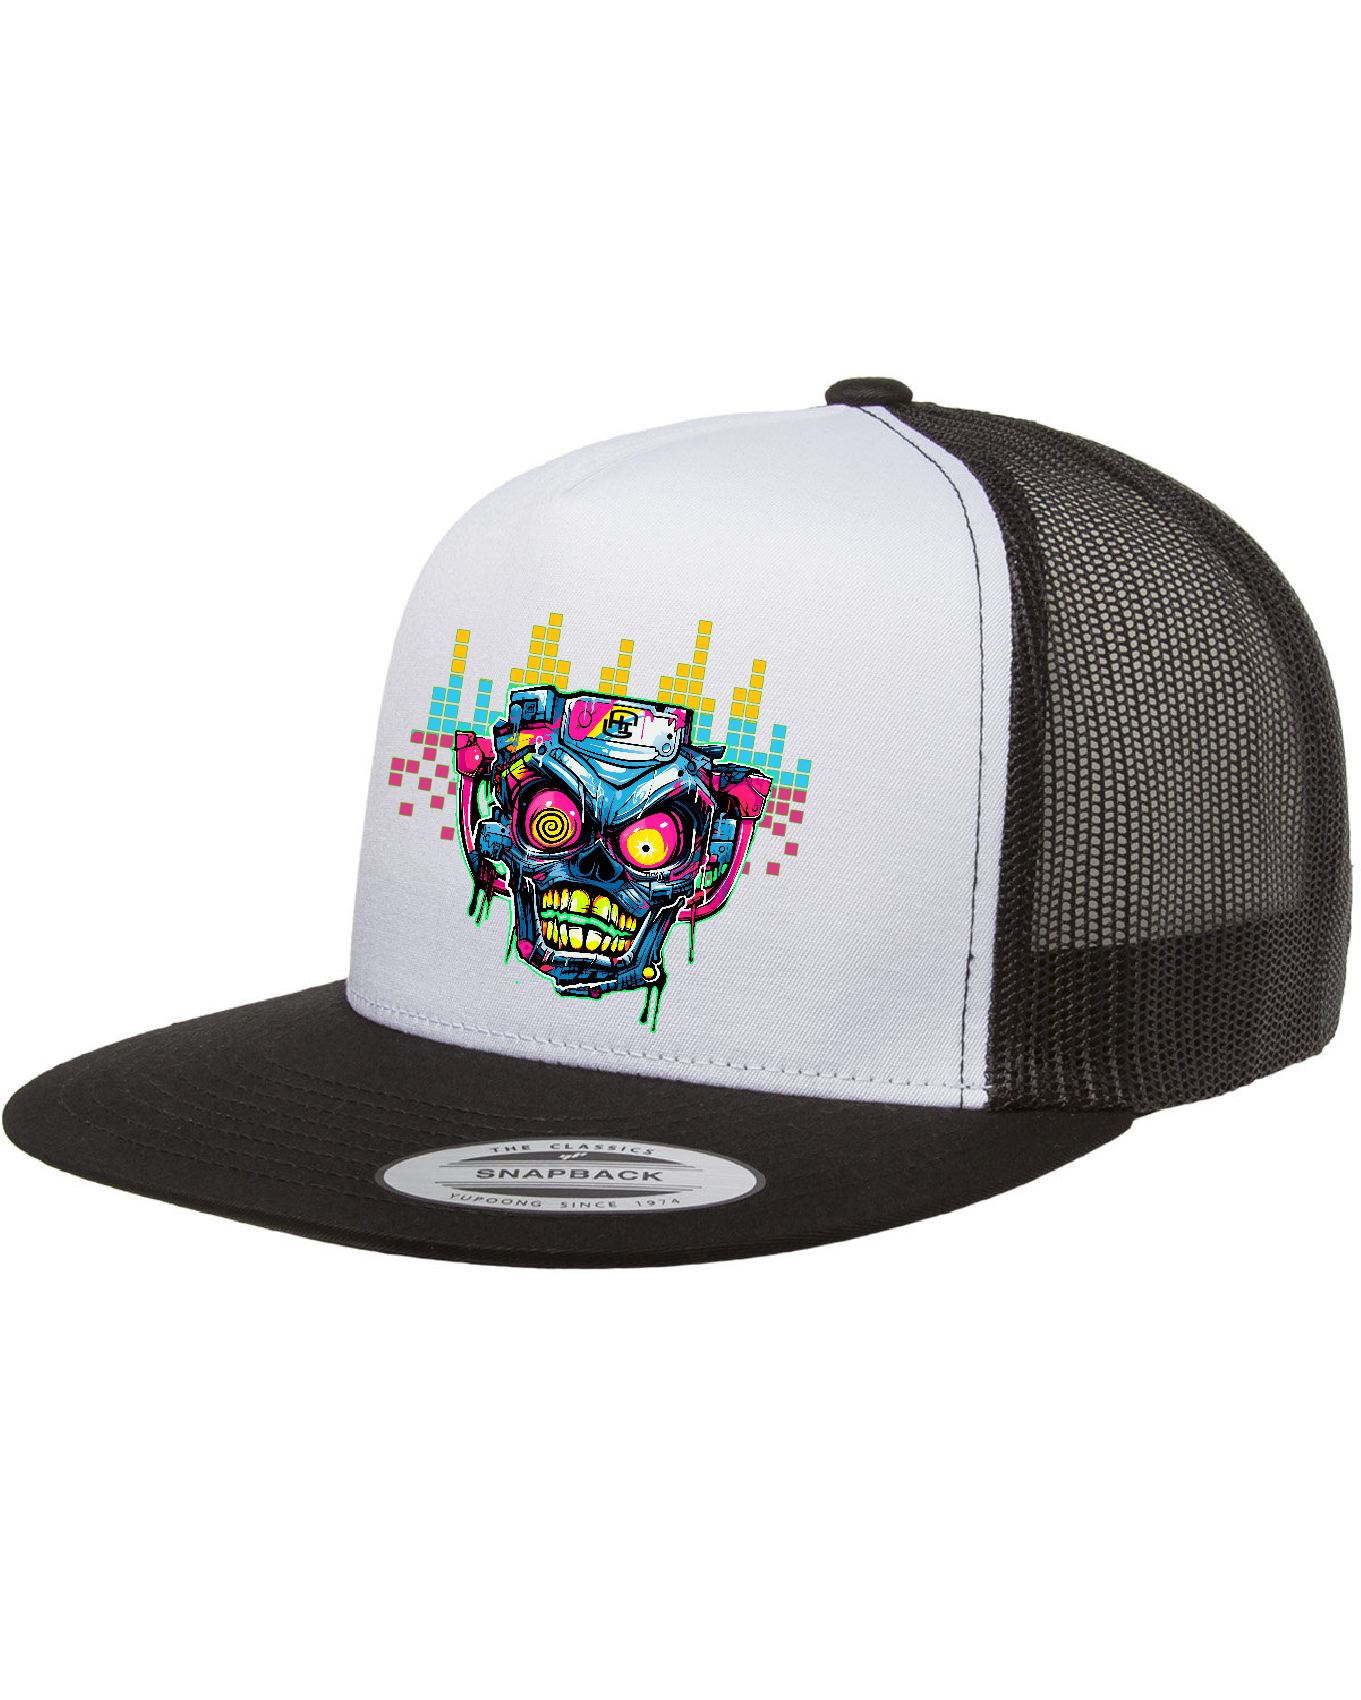 Controlled Chaos (Snapback)